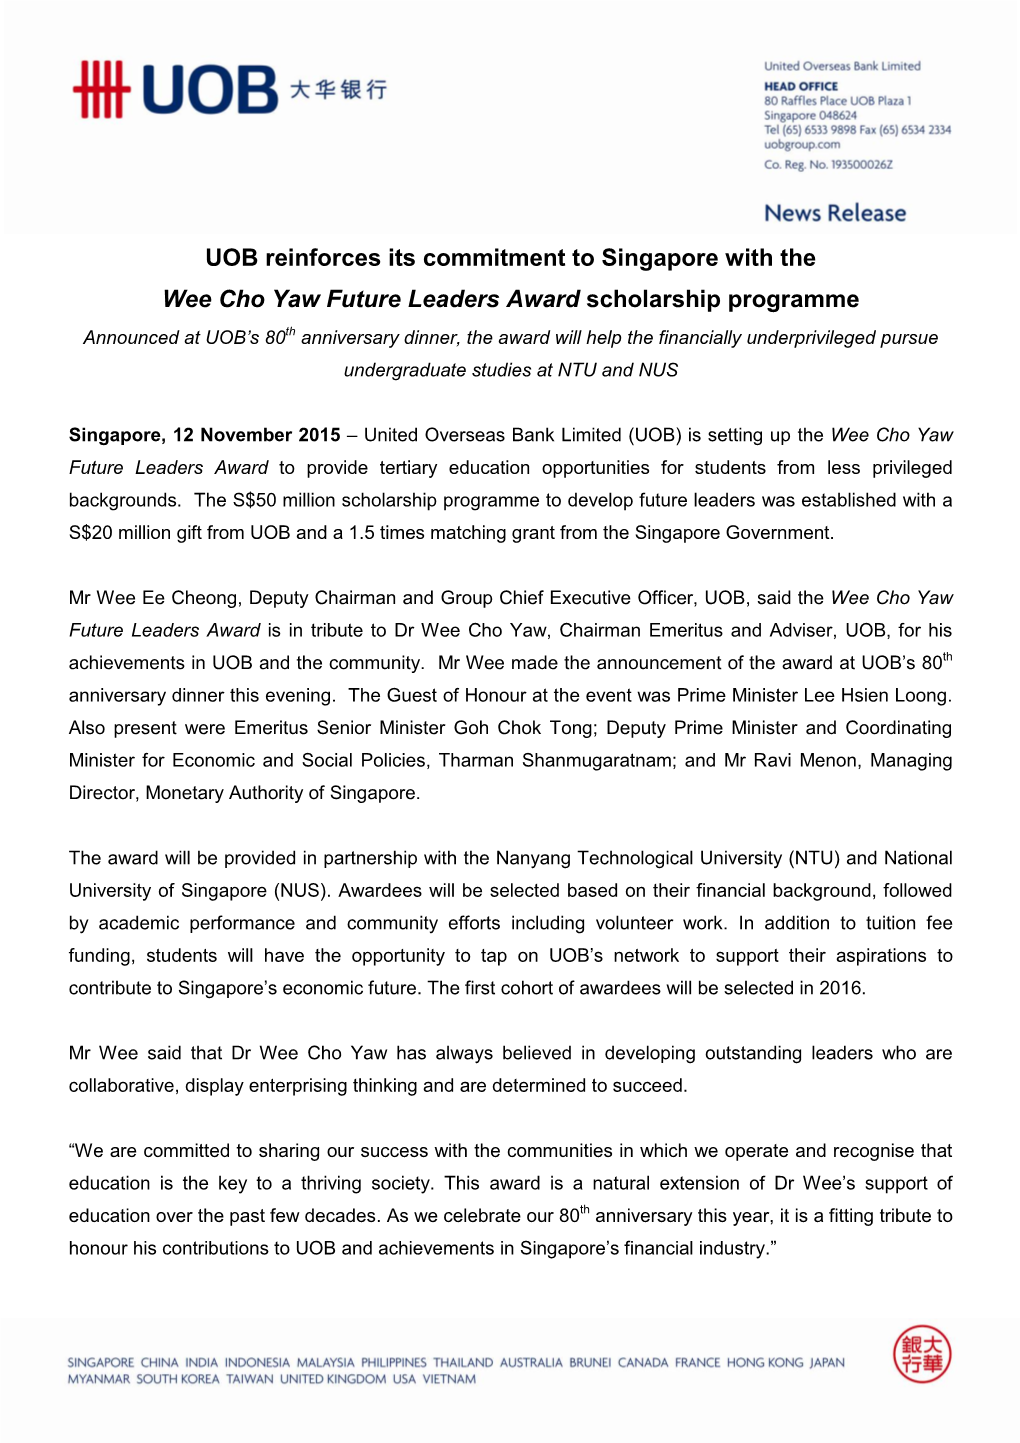 UOB Reinforces Its Commitment to Singapore with The